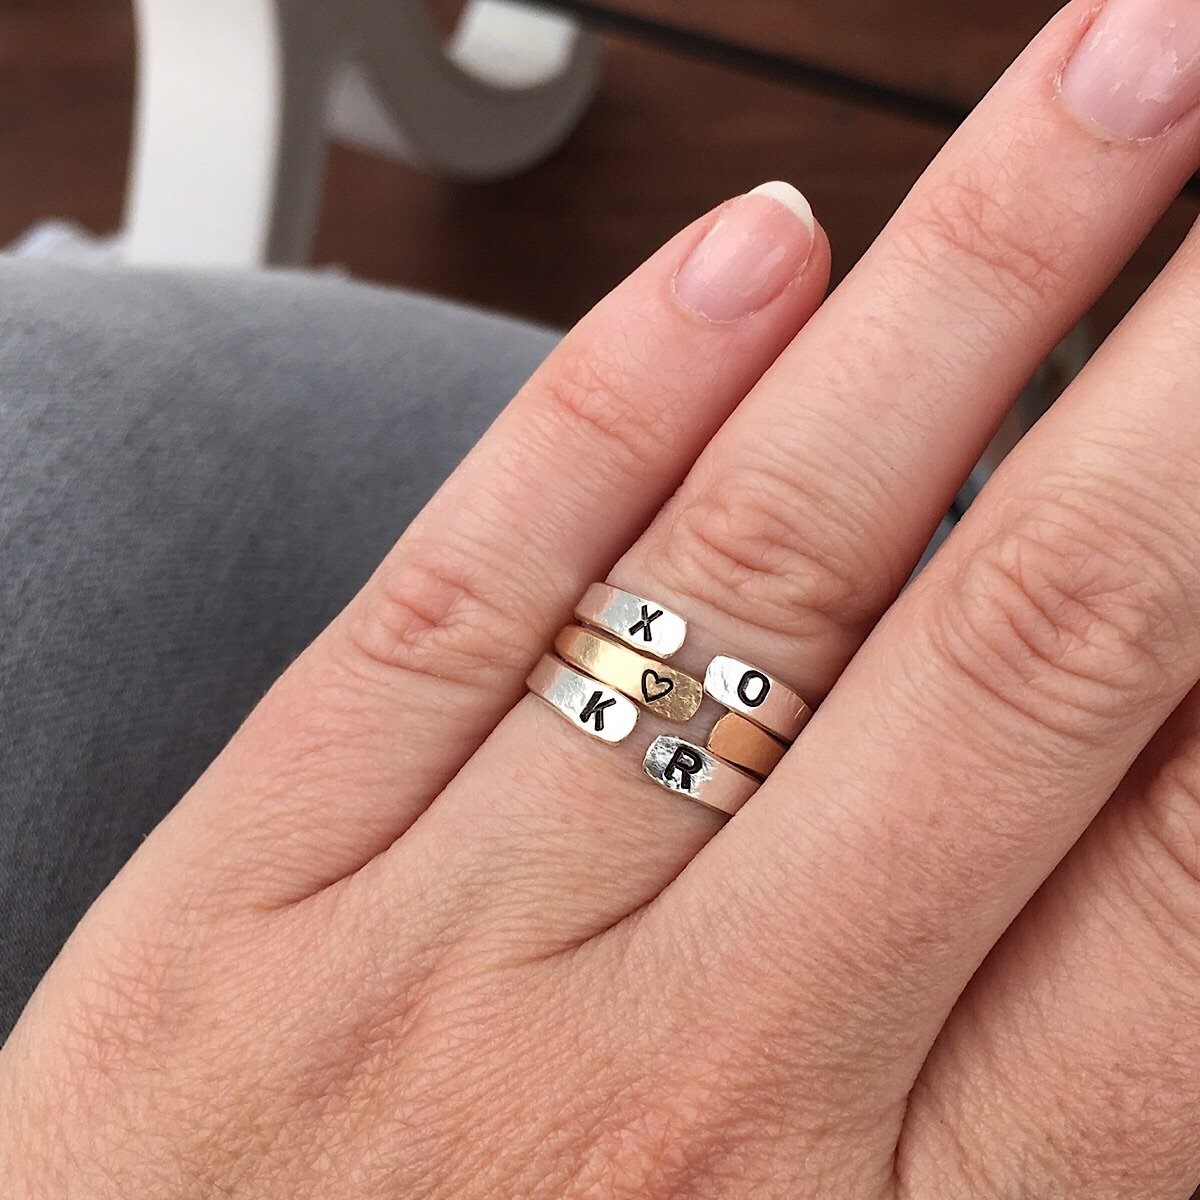 Minimalist Personalized Custom Engraved Initial Matching Sterling Silver  Ring Set as Couples or Cool Best Friend Rings Idea for Women or Men - Etsy